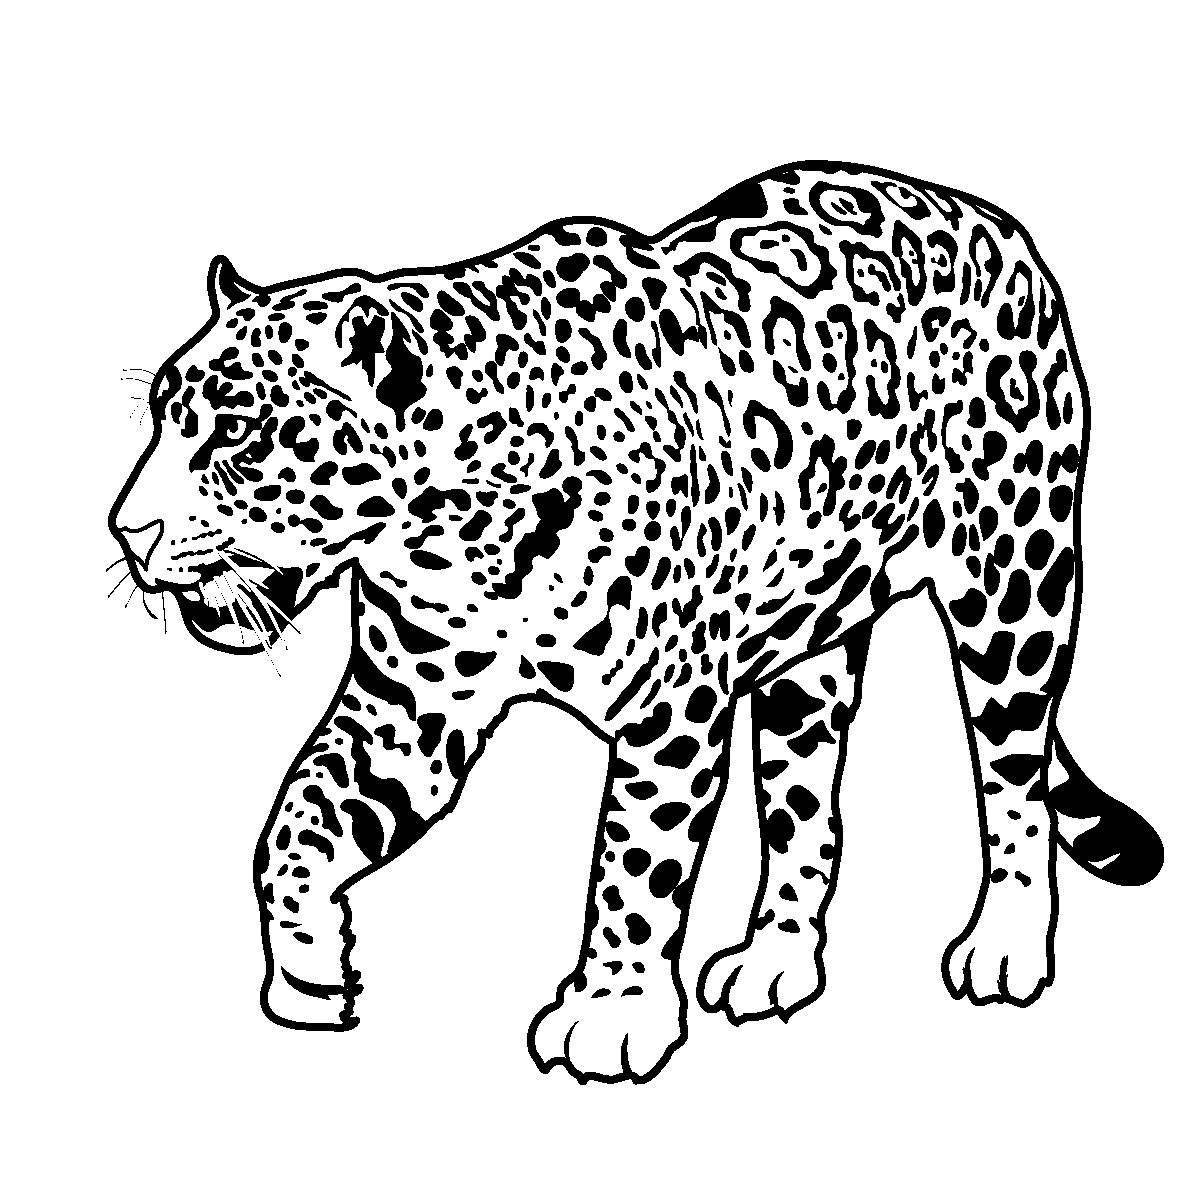 Charming leopard coloring book for children 5-6 years old